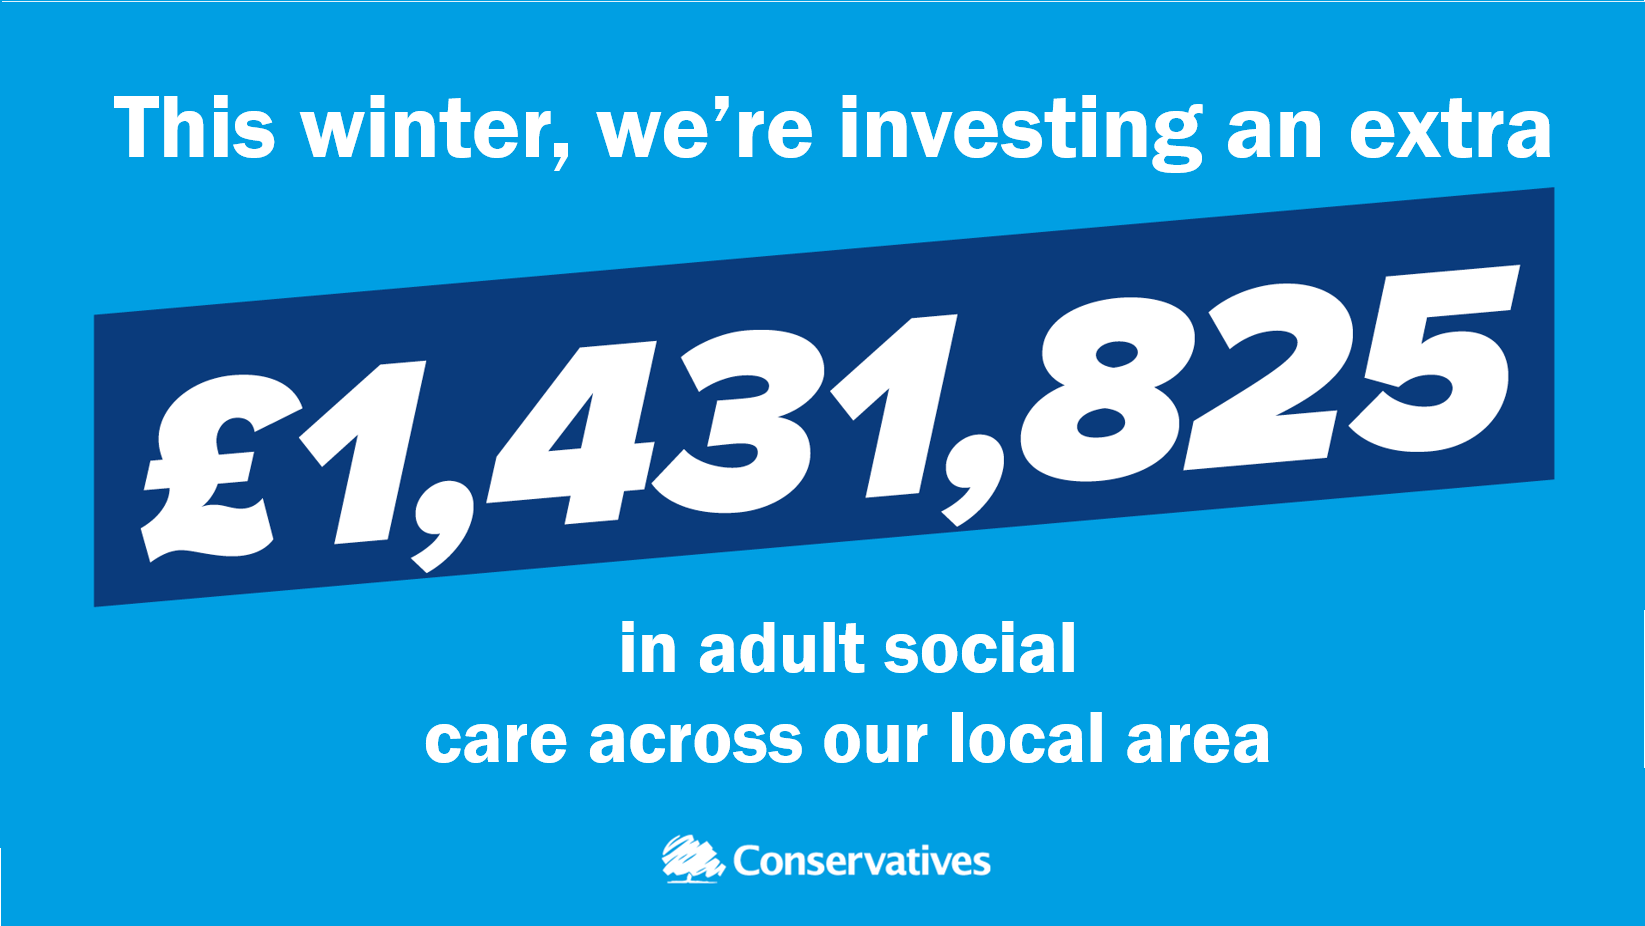 Adult Social Care Funding Boost